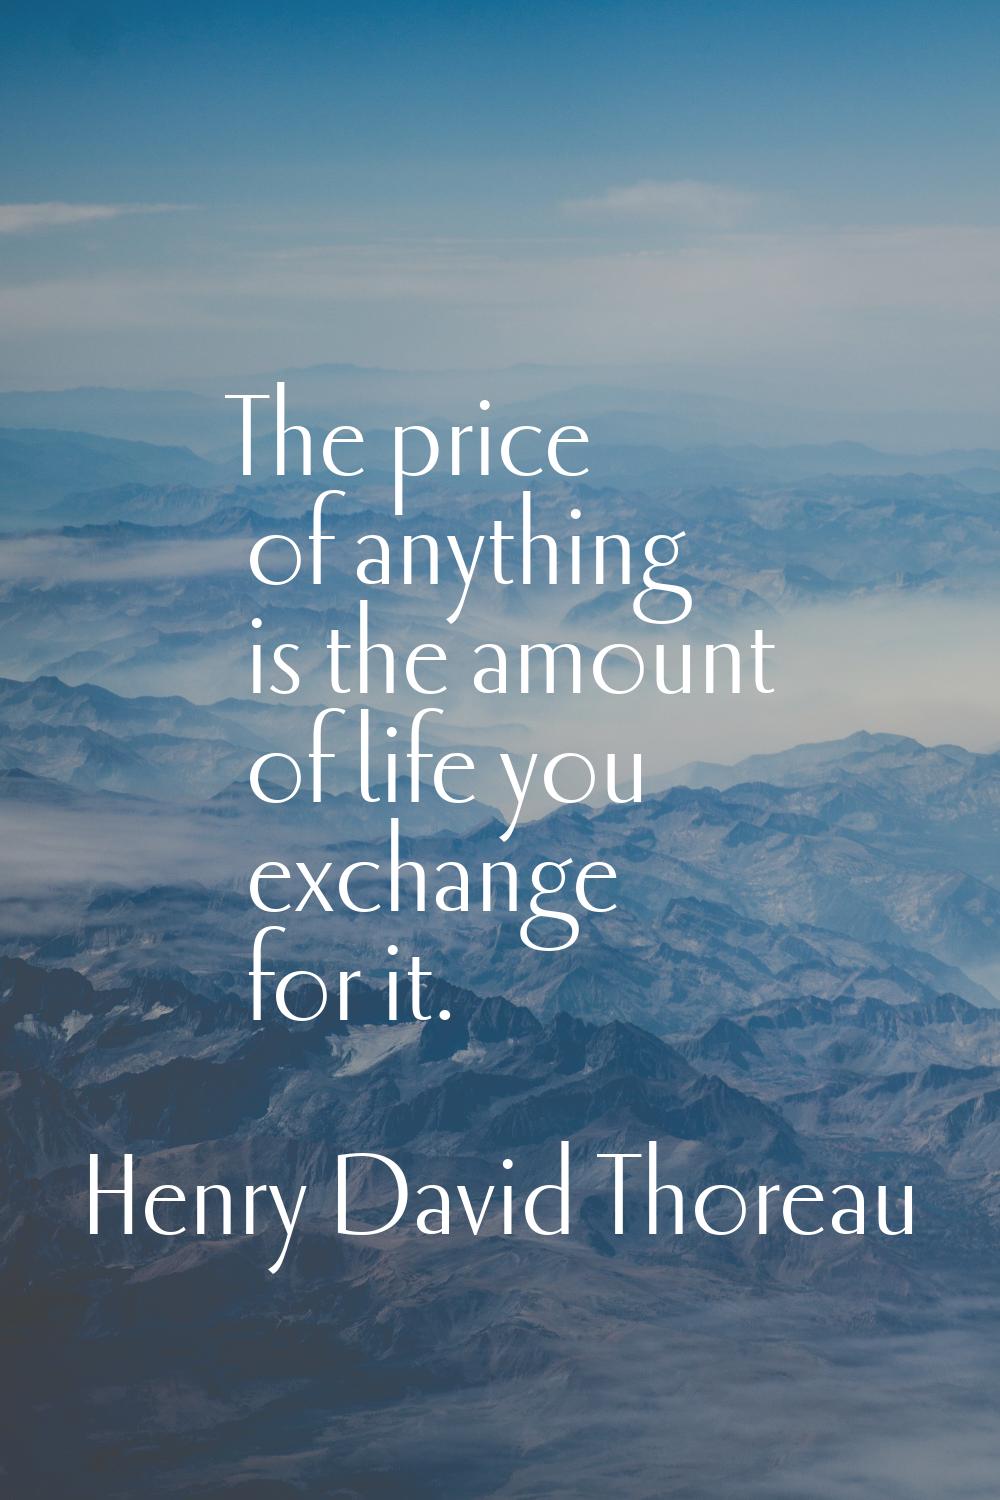 The price of anything is the amount of life you exchange for it.